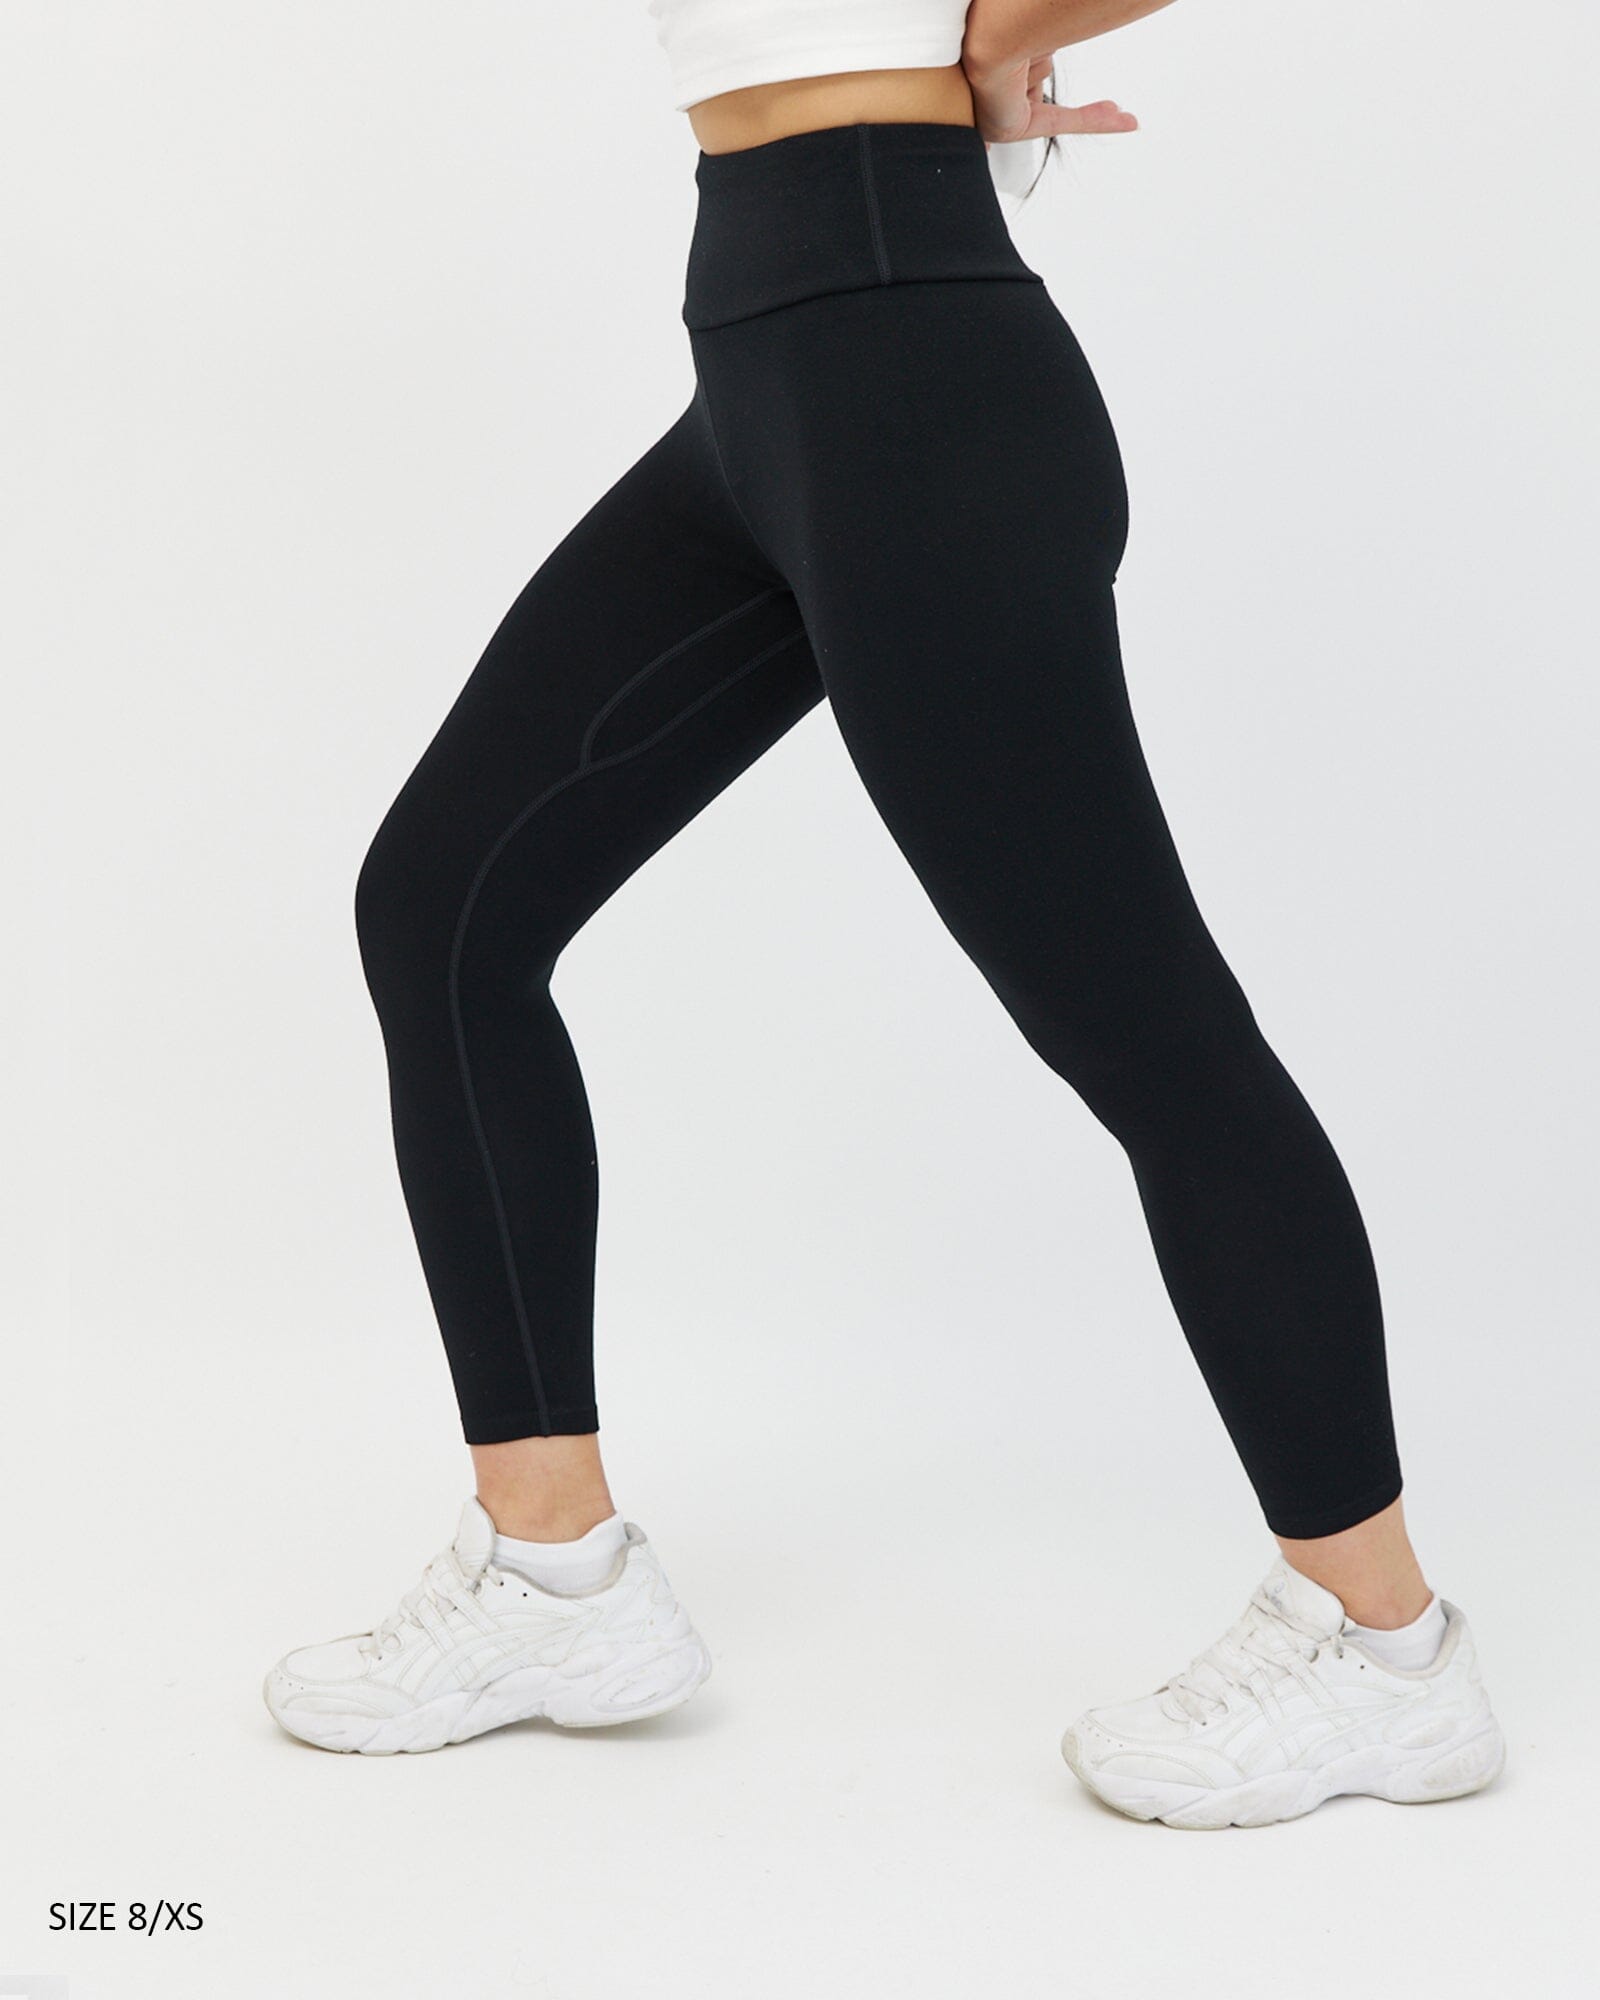 Fabletics Women's On-The-Go High-Waisted Powerhold Colorblock Leggings XS